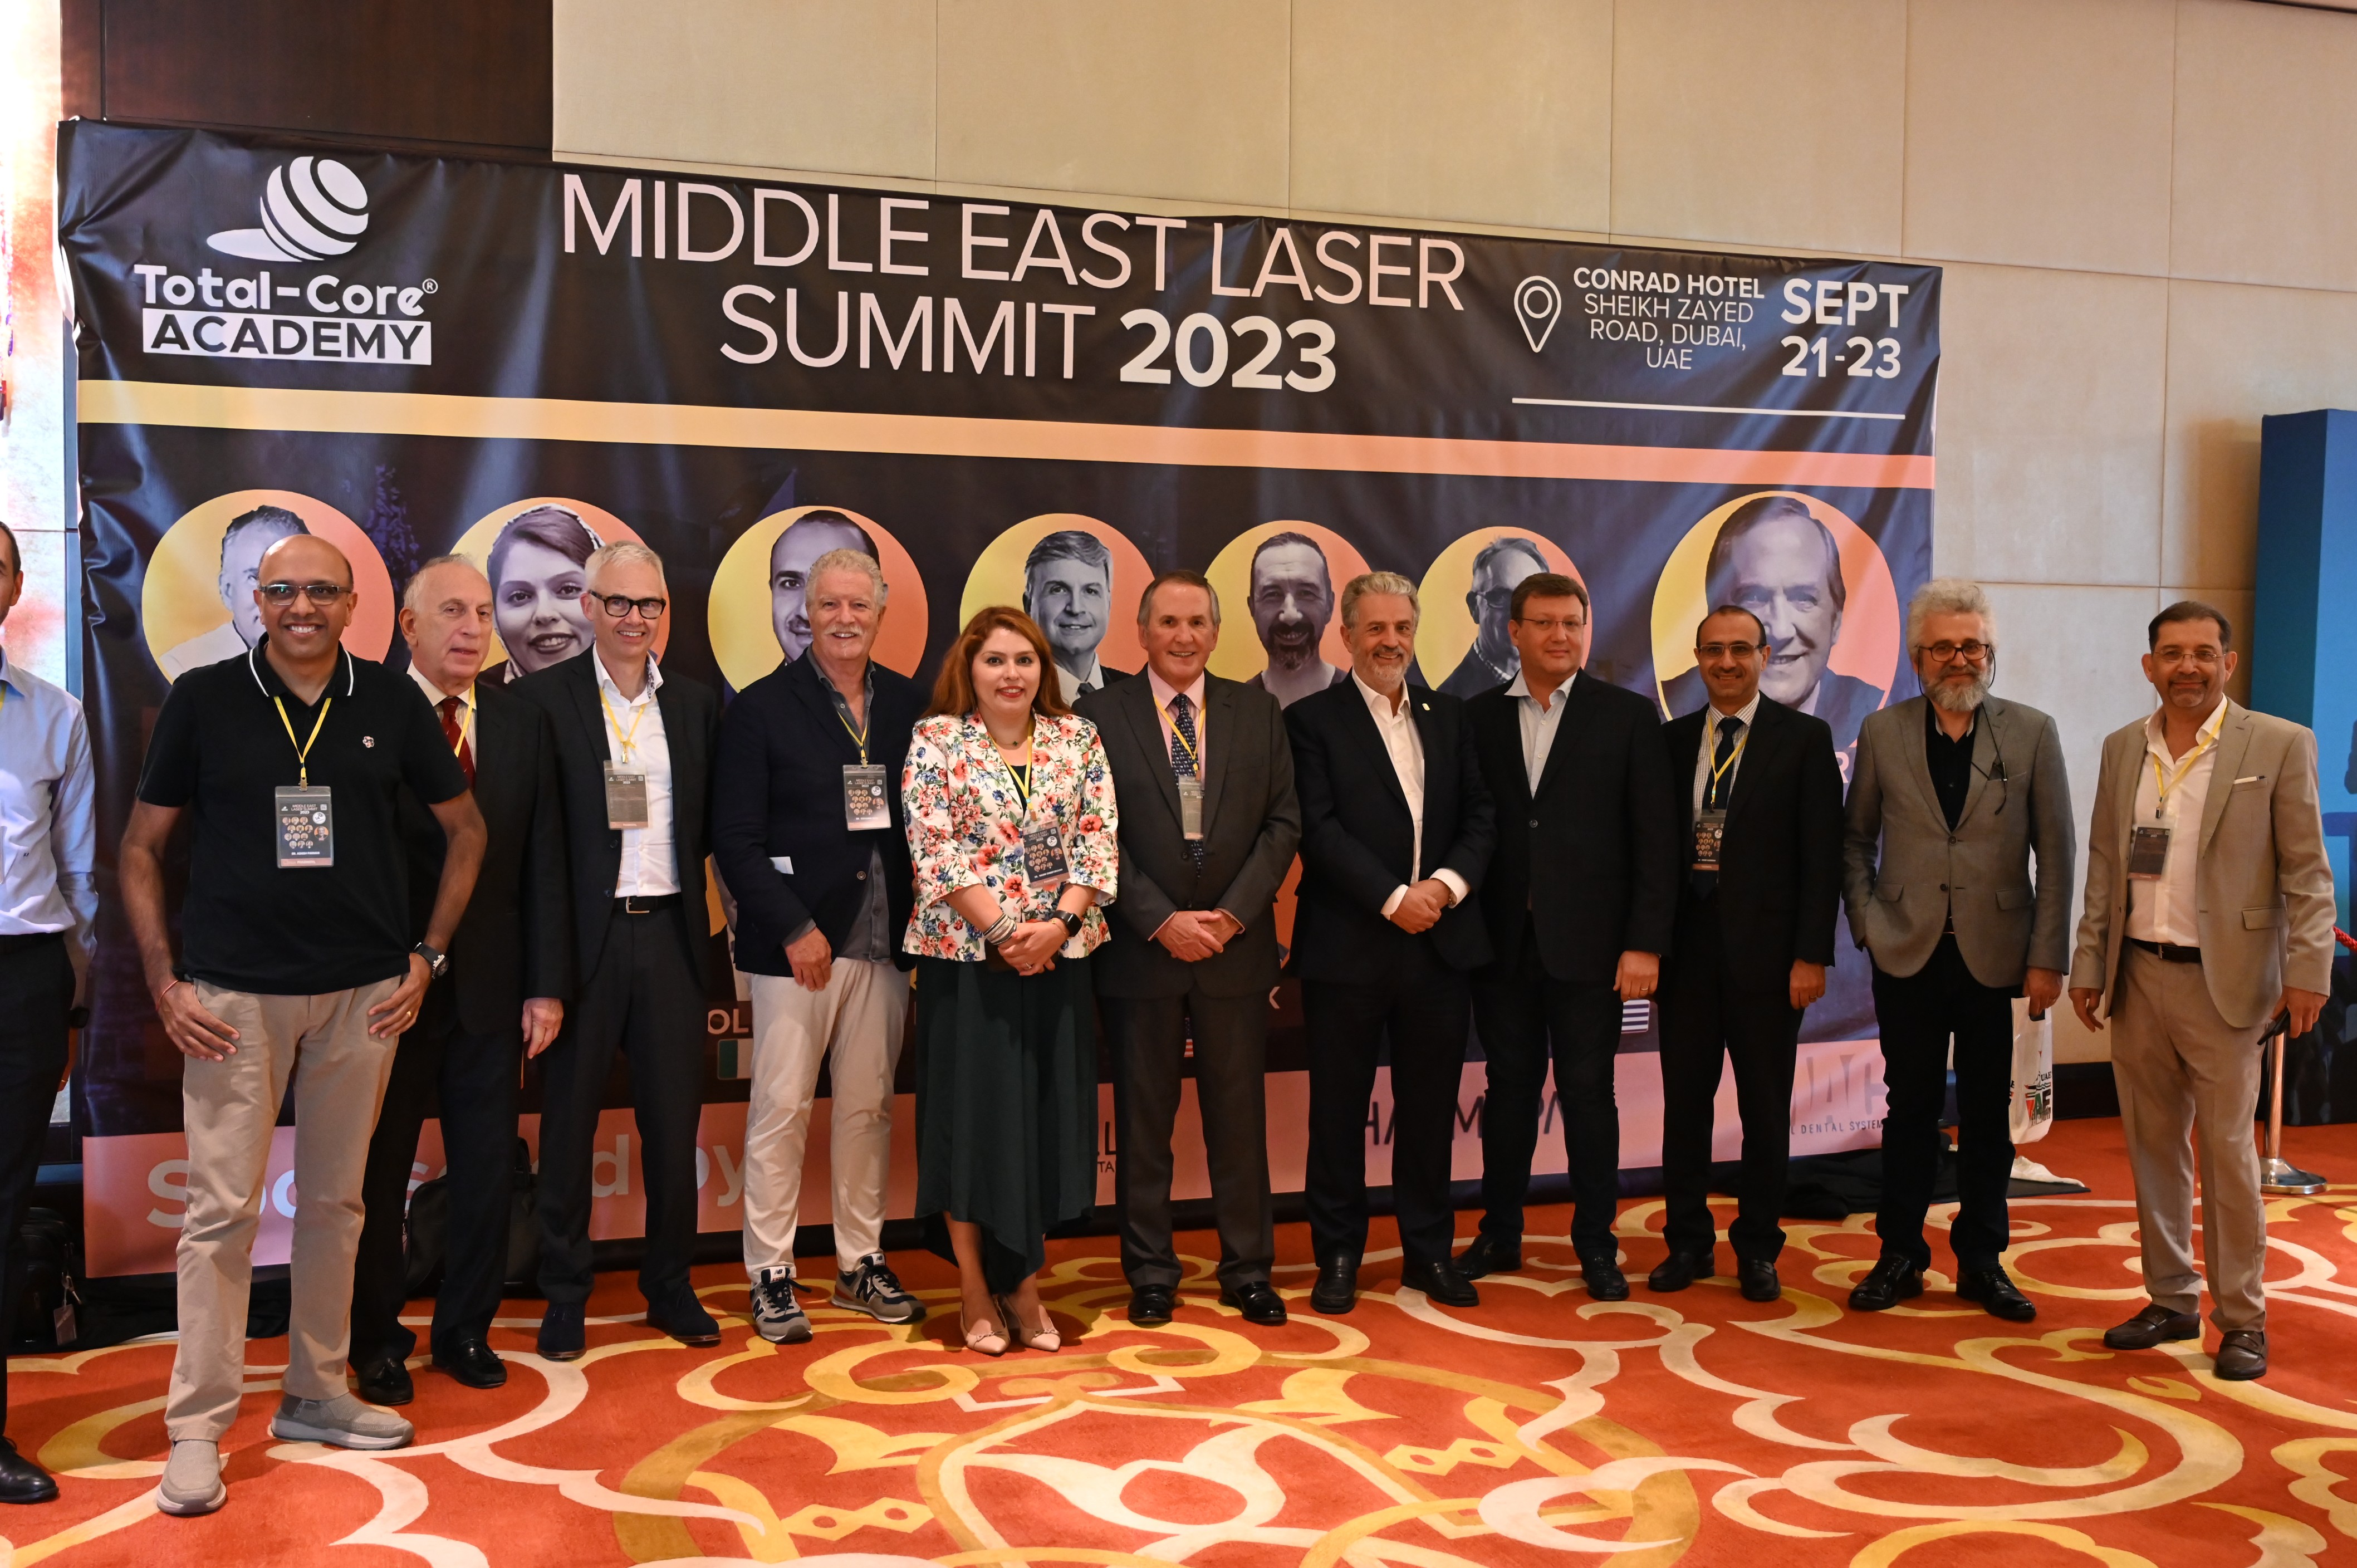 Middle East Laser Summit